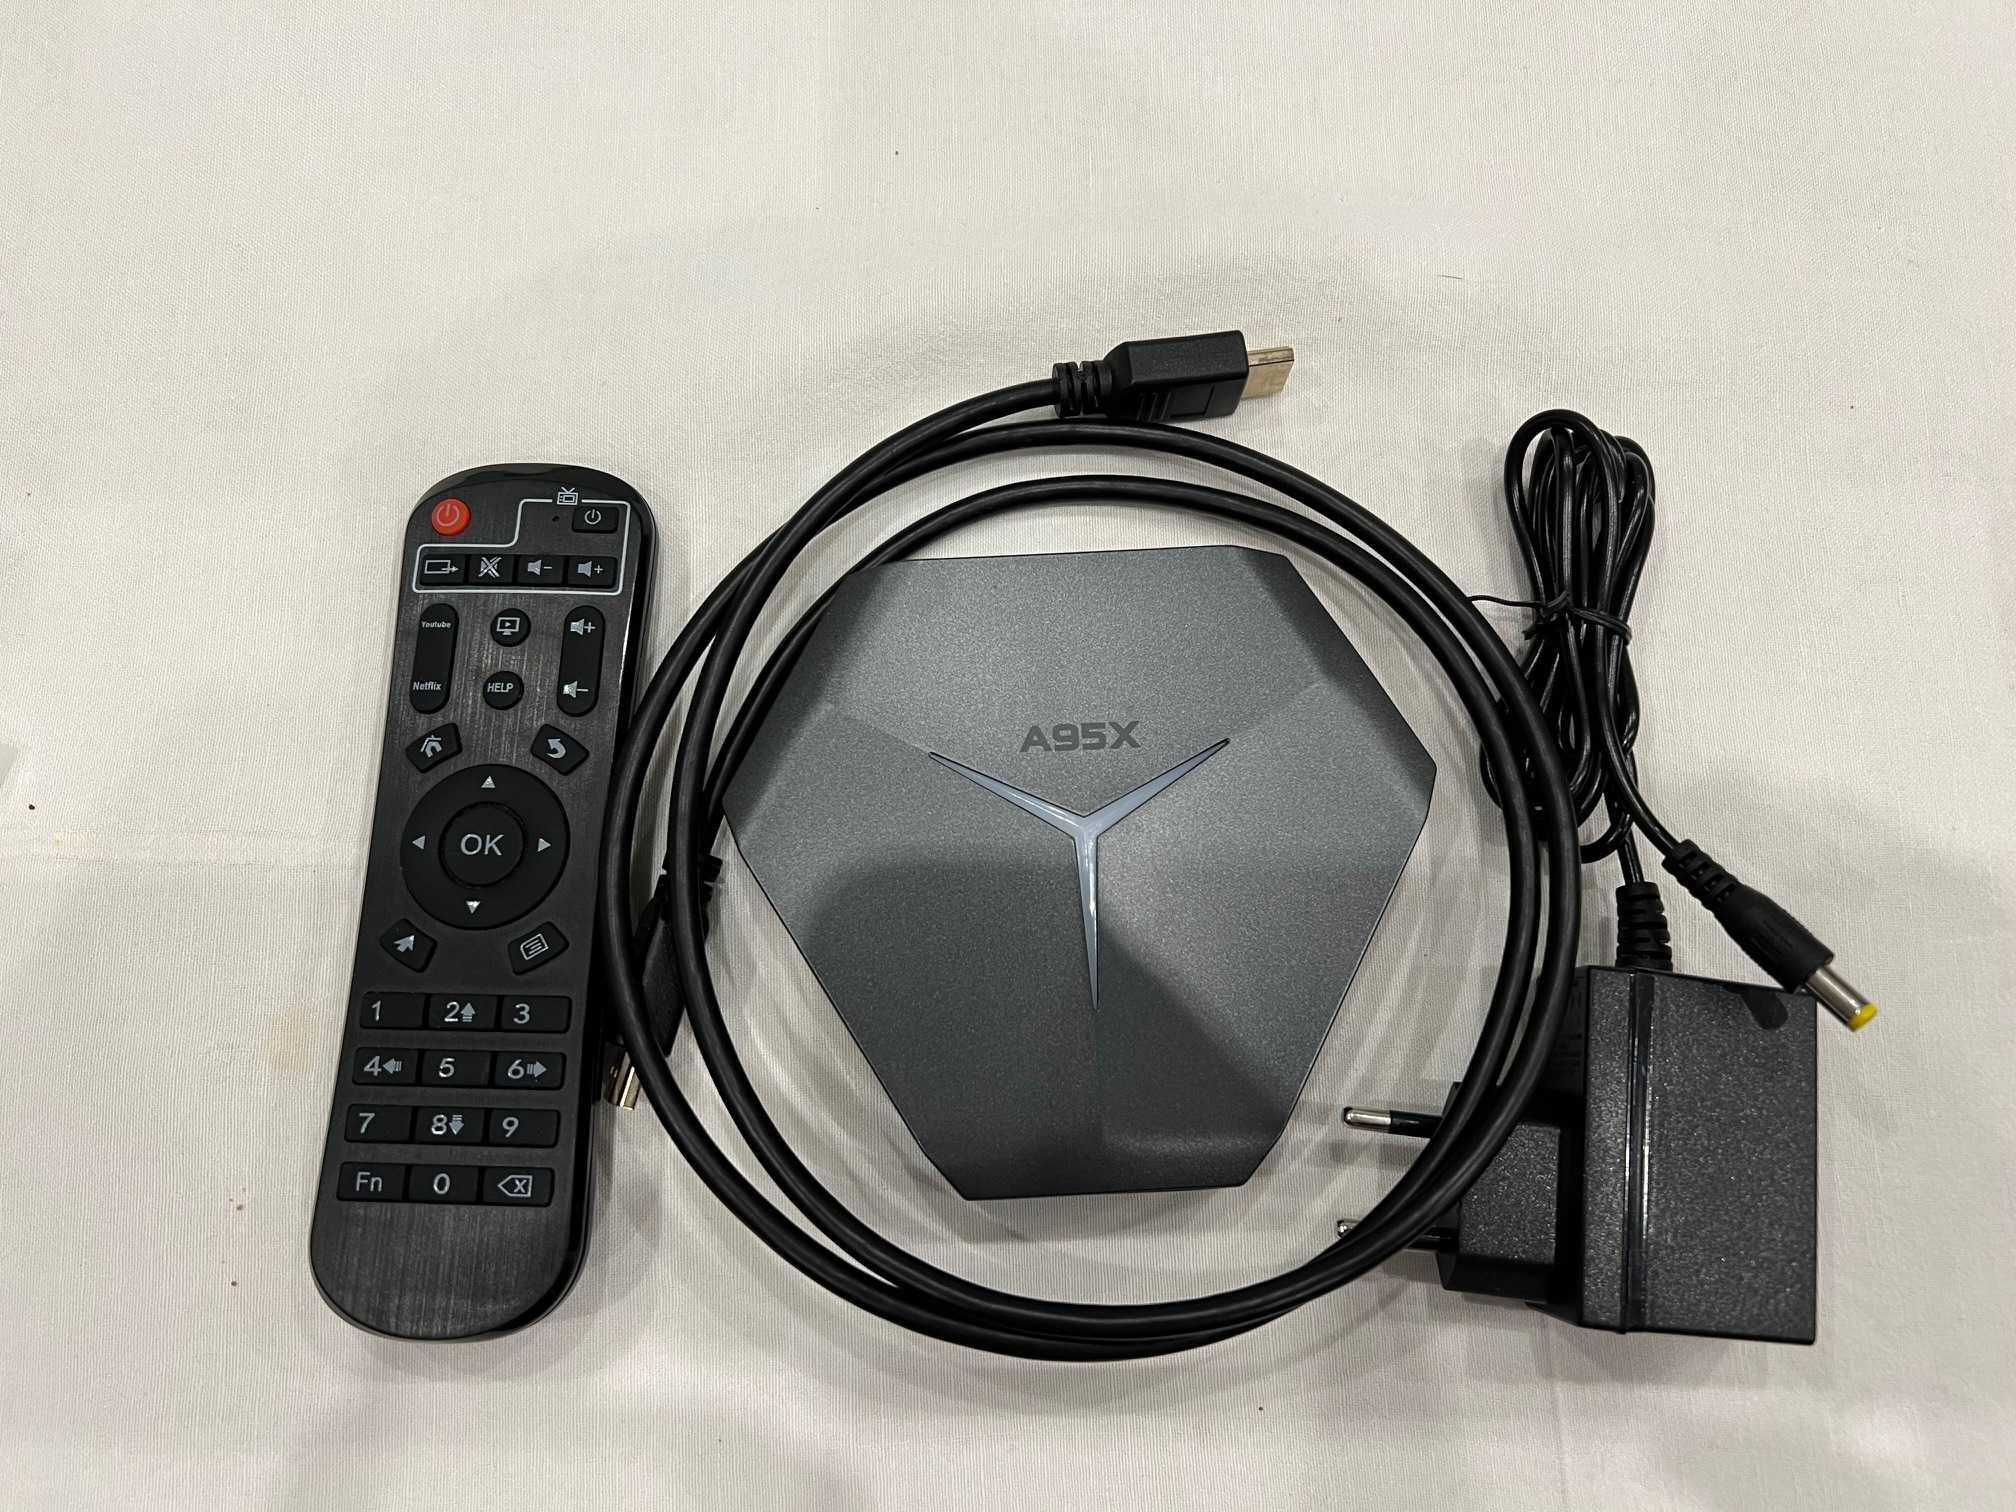 Box Android Iptv A95X